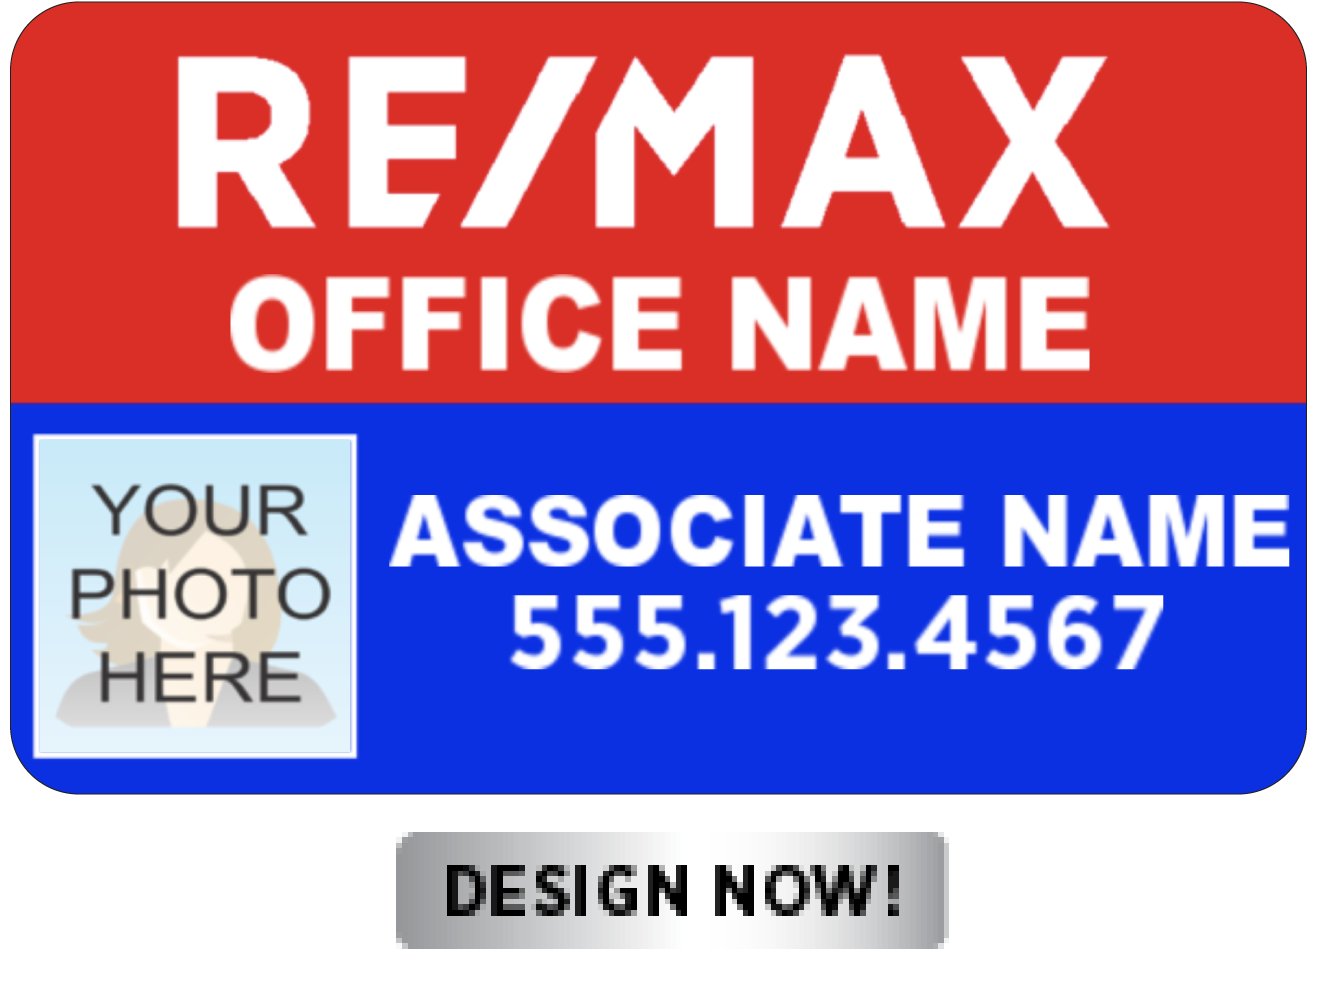 remax11x18magnetredbluewithpicrevised.png